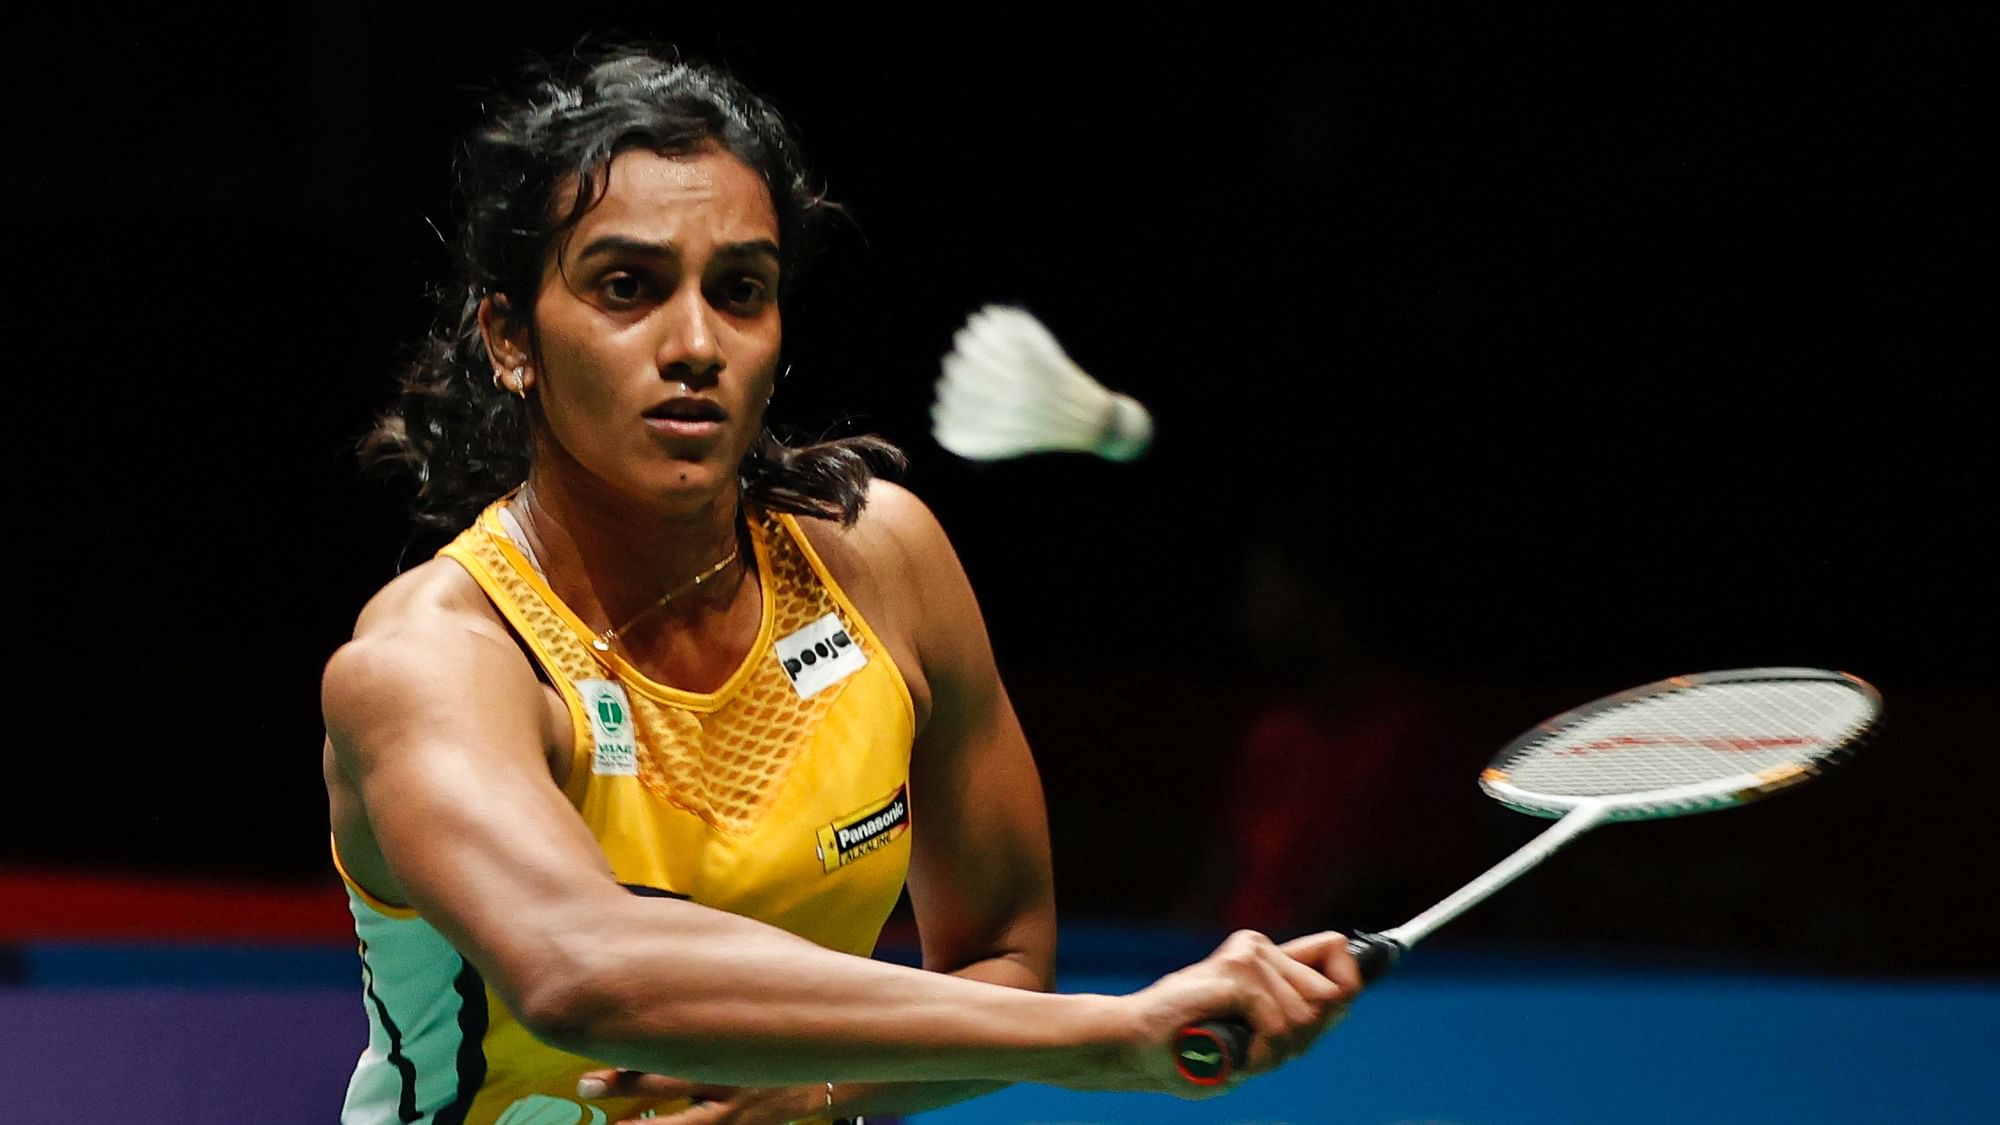 PV Sindhu has won her first round match of the All England Championships.